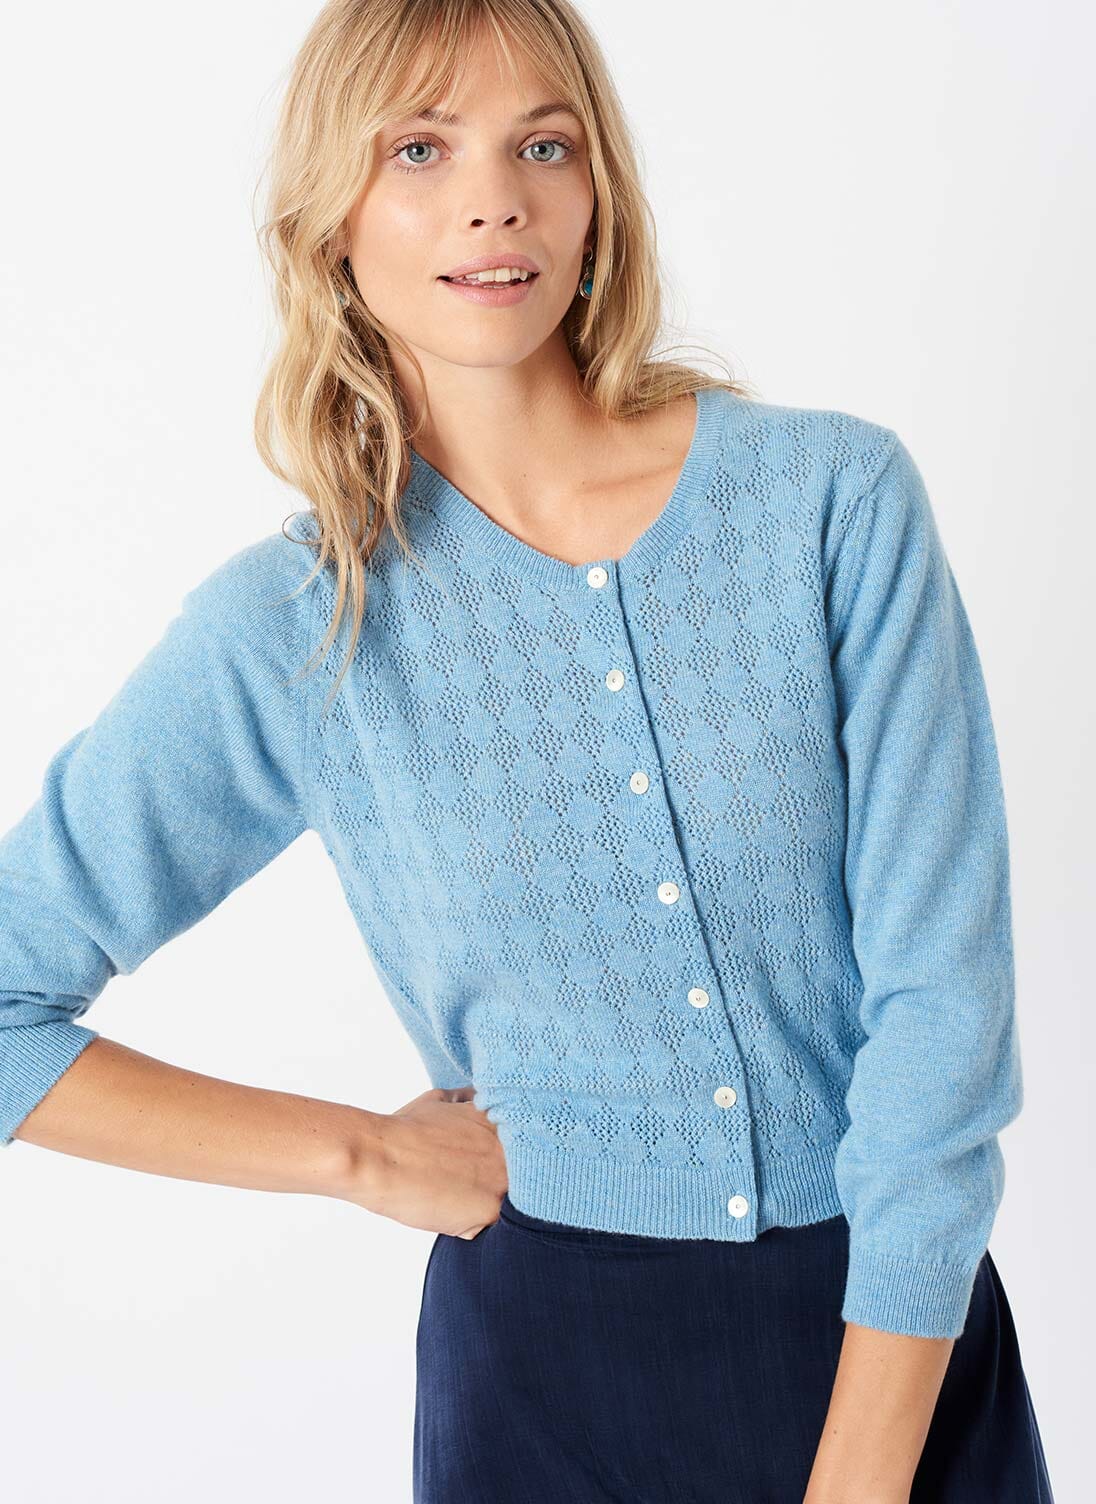 Periwinkle Cashmere Pointelle Cardigan | Cashmere Jumpers & Cardigans ...